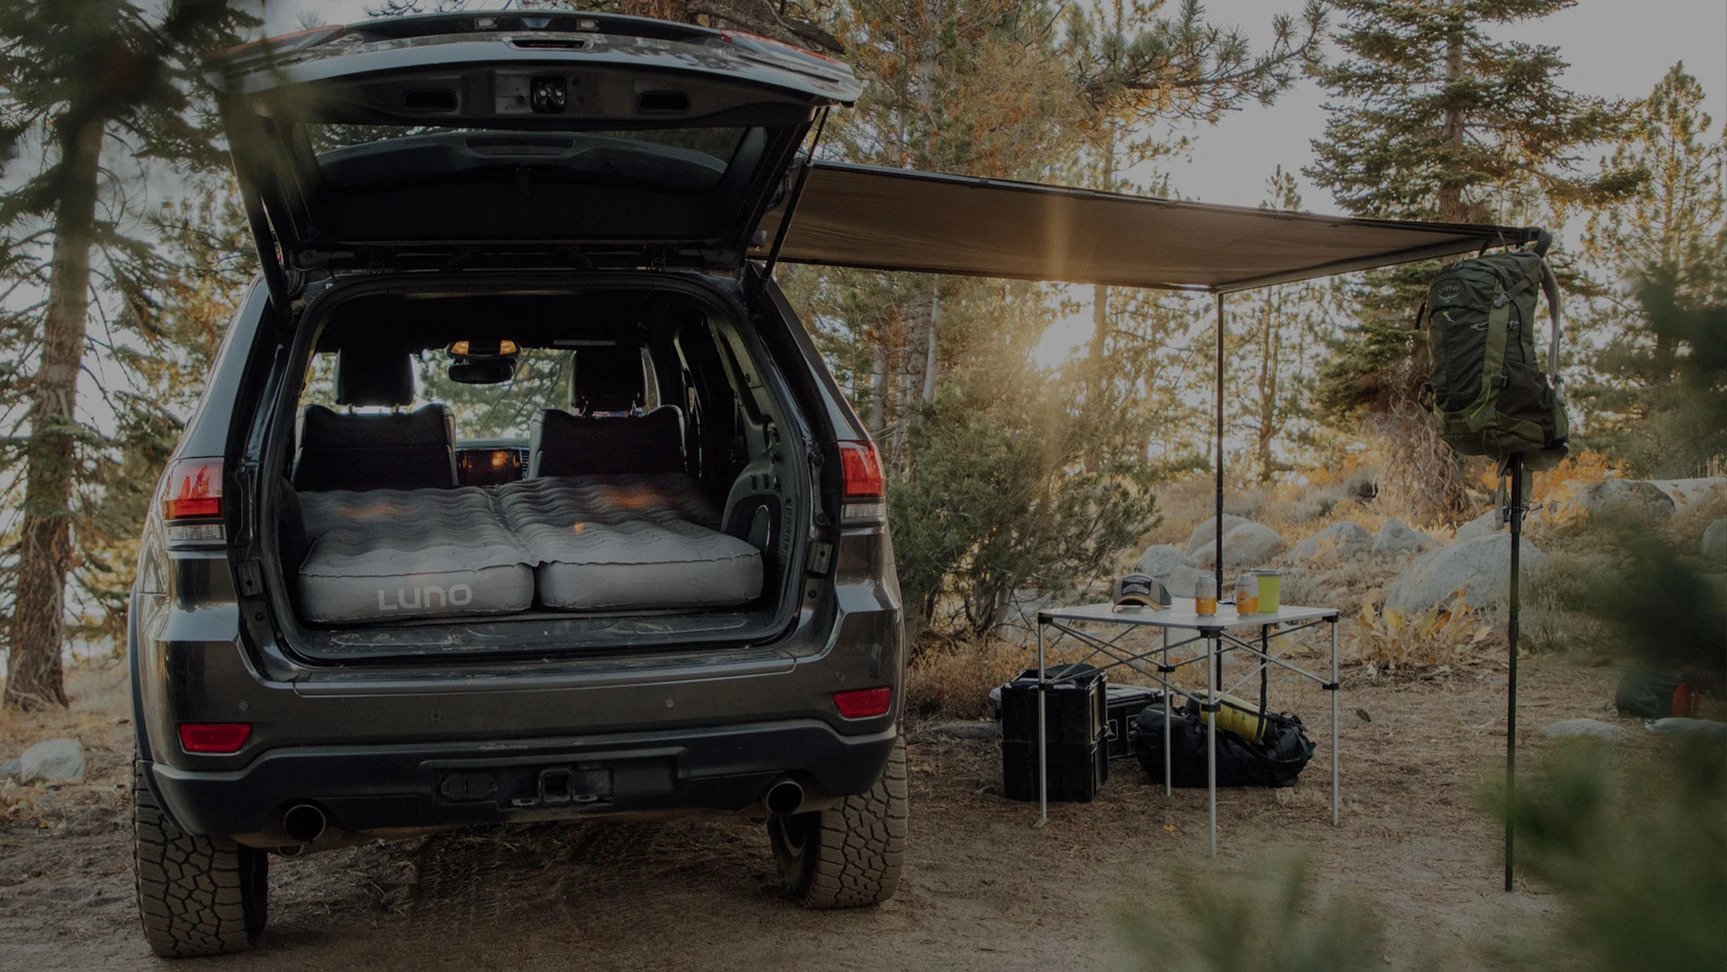 Turn Your Car into a Camper with the Luno 2.0